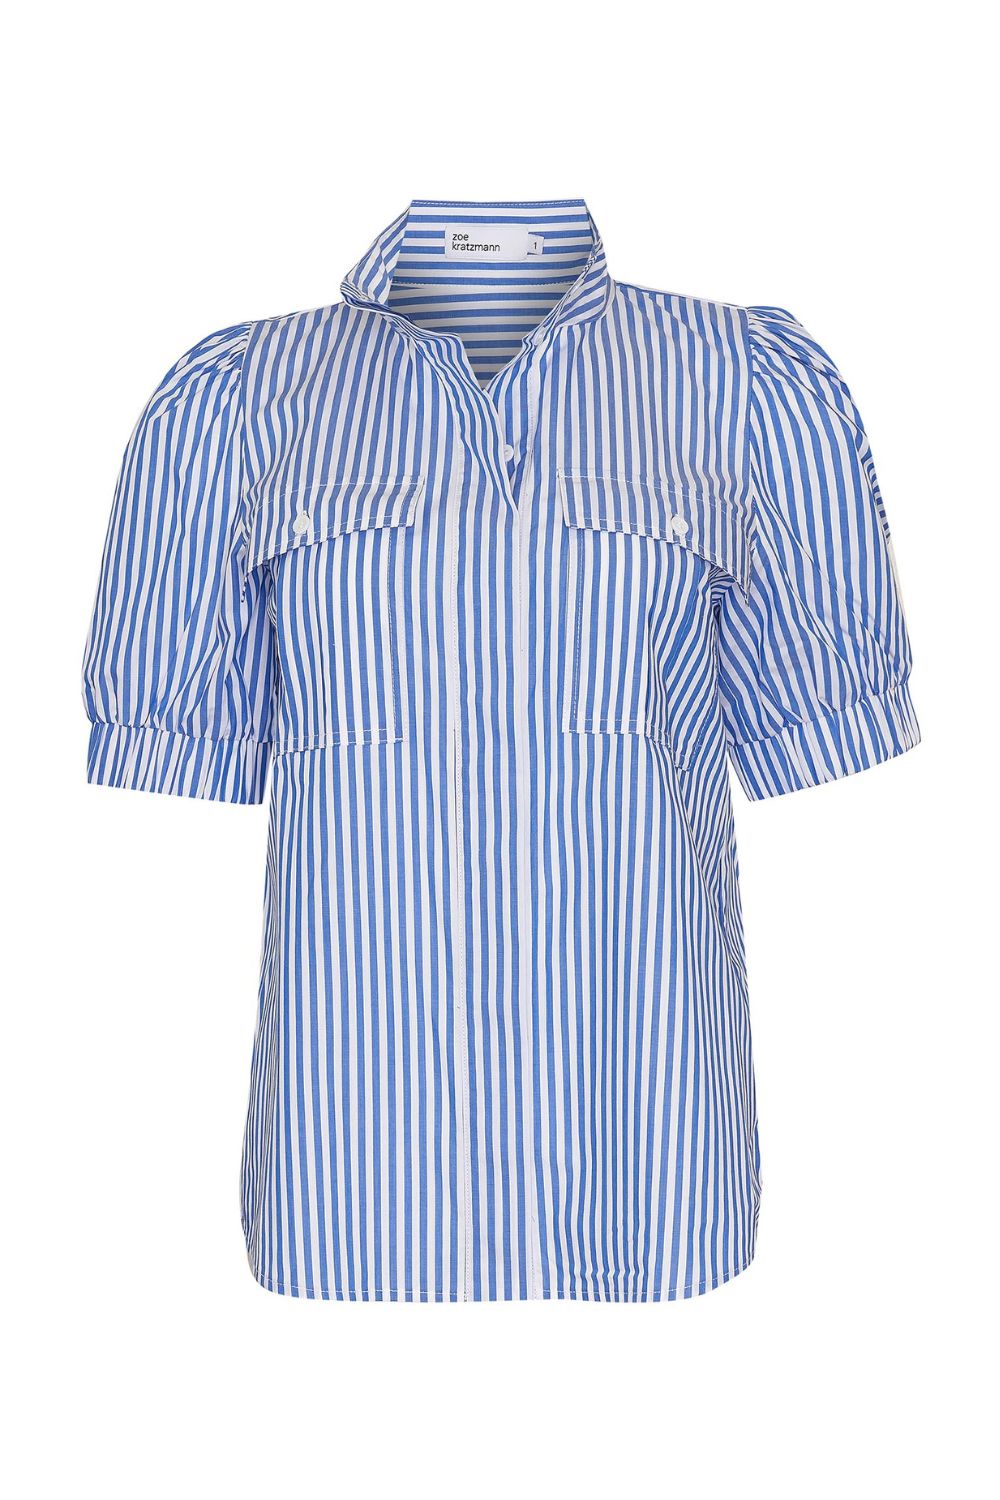 blue and white stripe, high neck, button down, mid length sleeve, curved hem, shirt, product image